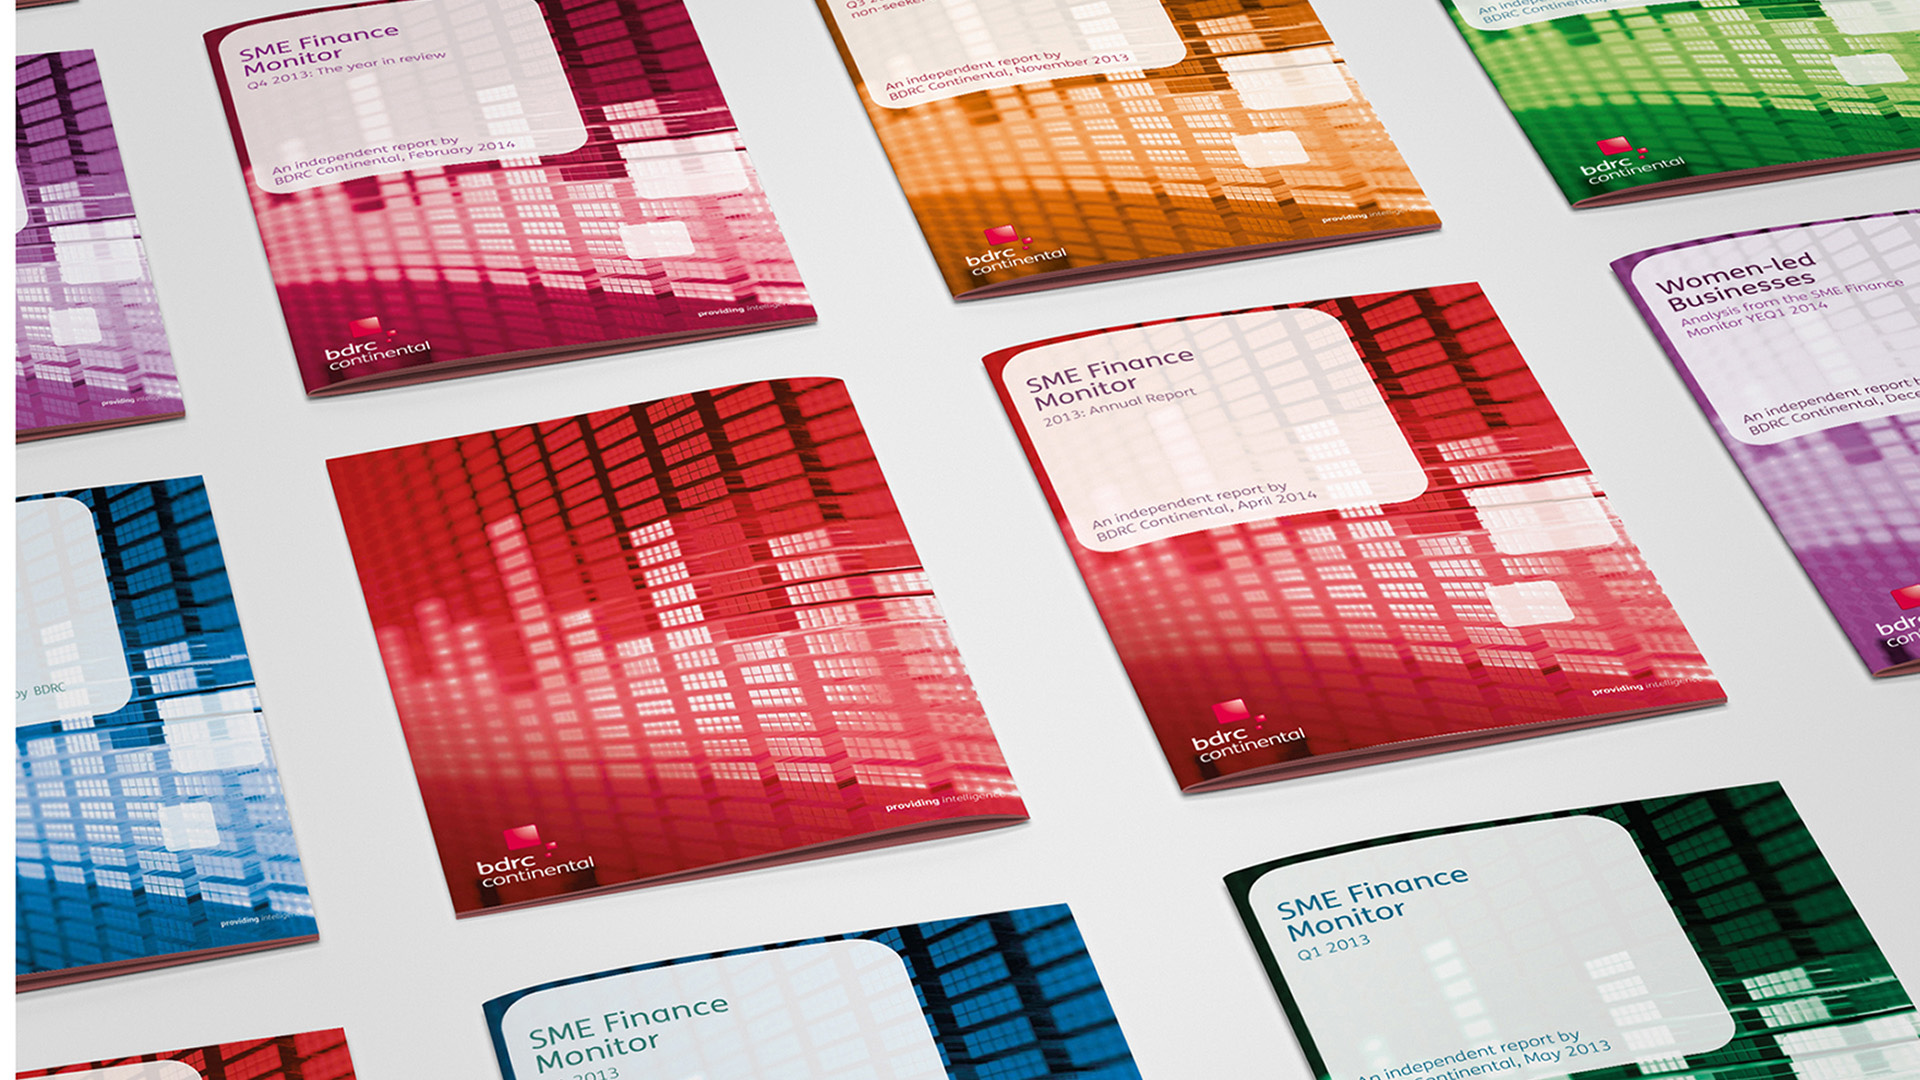 A selection of colourful BVA BDRC SME Finance Monitor Report Covers on a grey surface